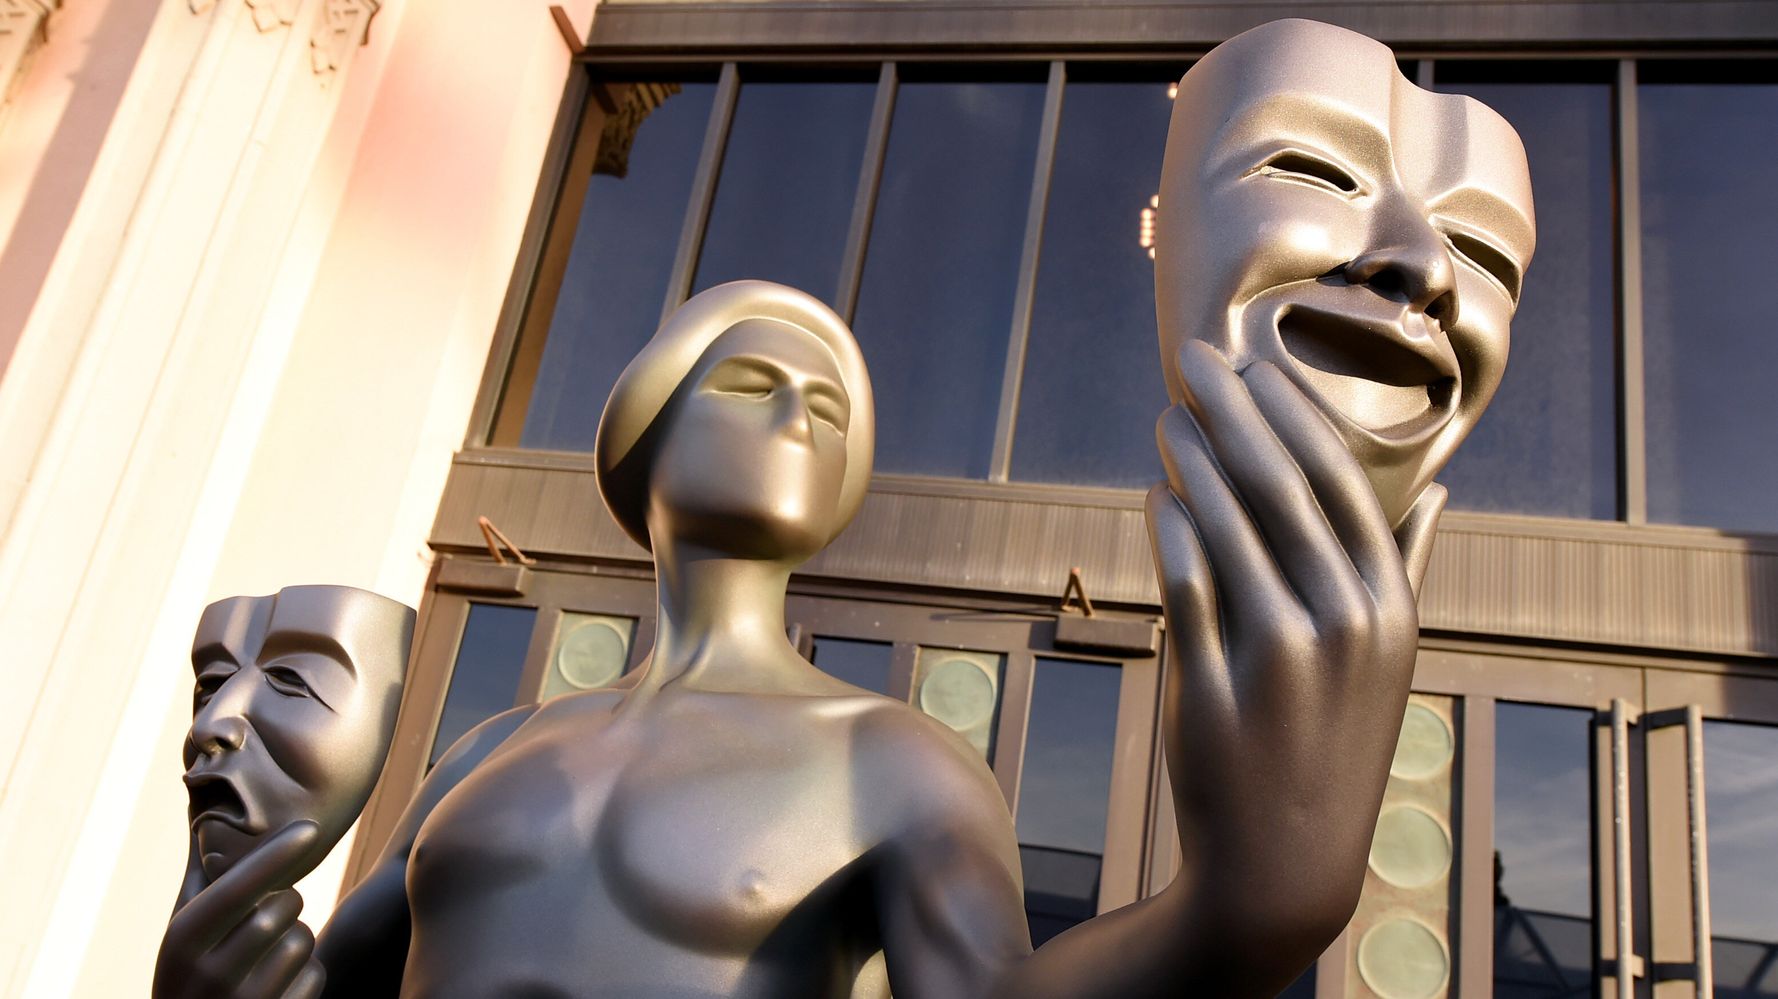 SAG Awards to be pre-recorded, lasting just an hour after disastrous Globes